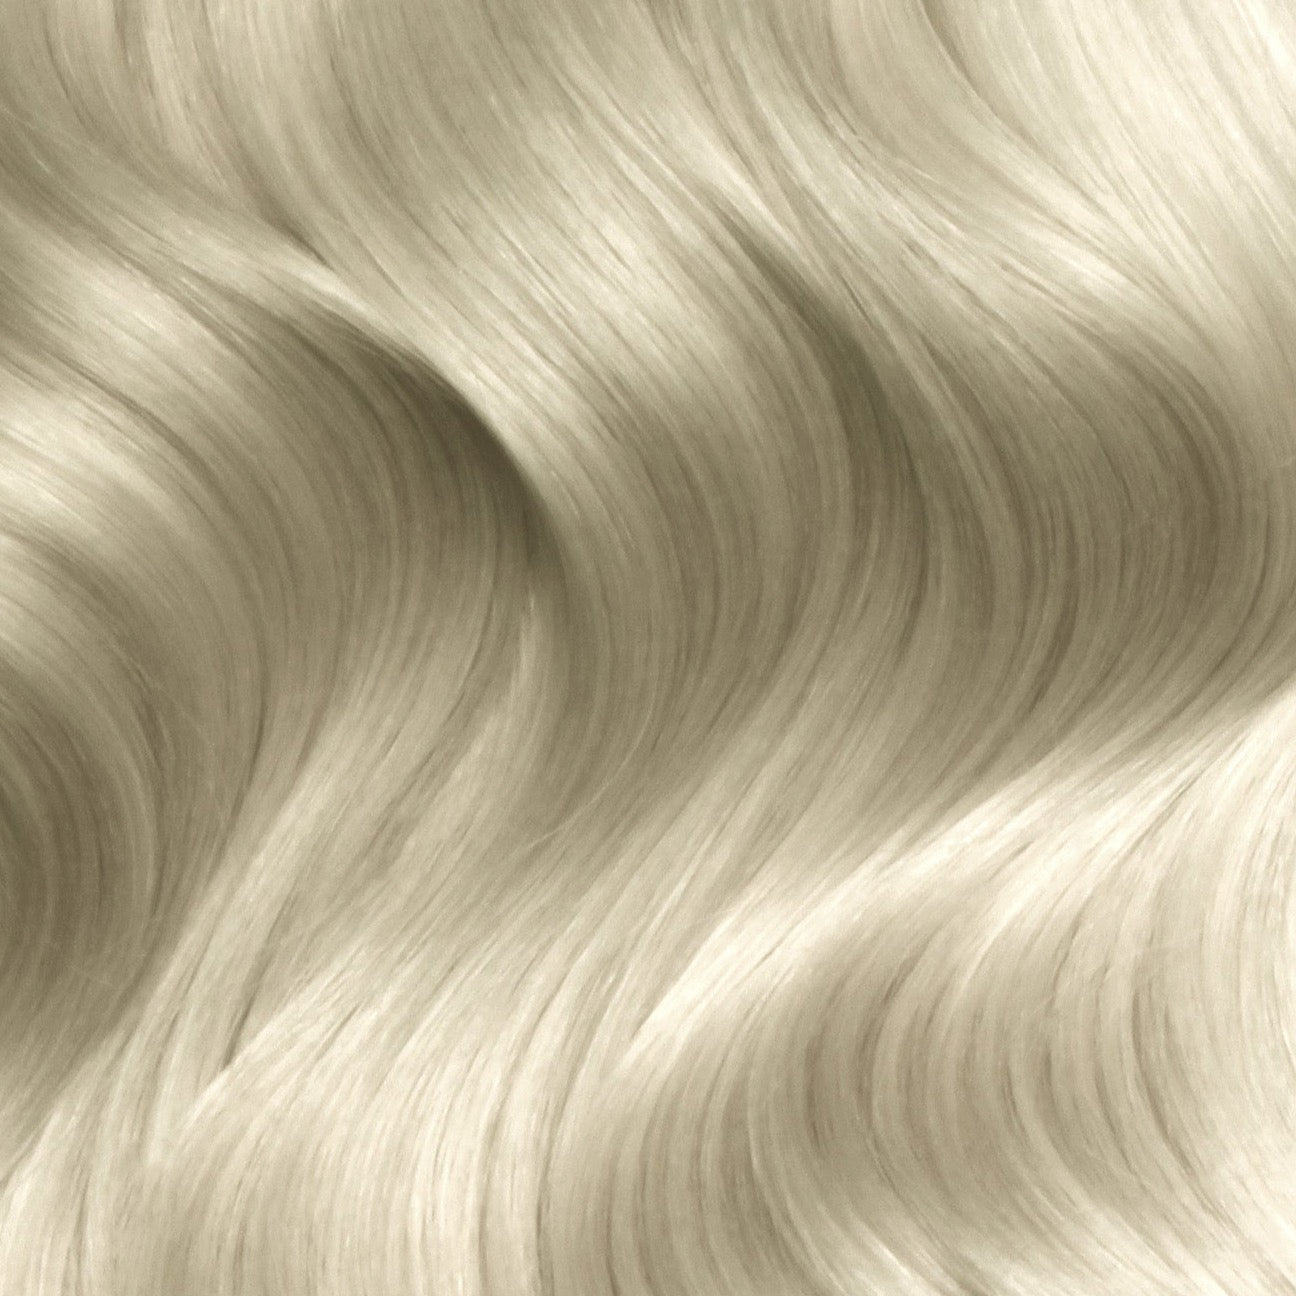 Nano Bonds 20 Inches - SWAY Hair Extensions Silver-Ash Ultra-fine, invisible bonds for a flawless, natural look. 100% Remy Human hair, lightweight and versatile. Reusable and perfect for individual or salon use.